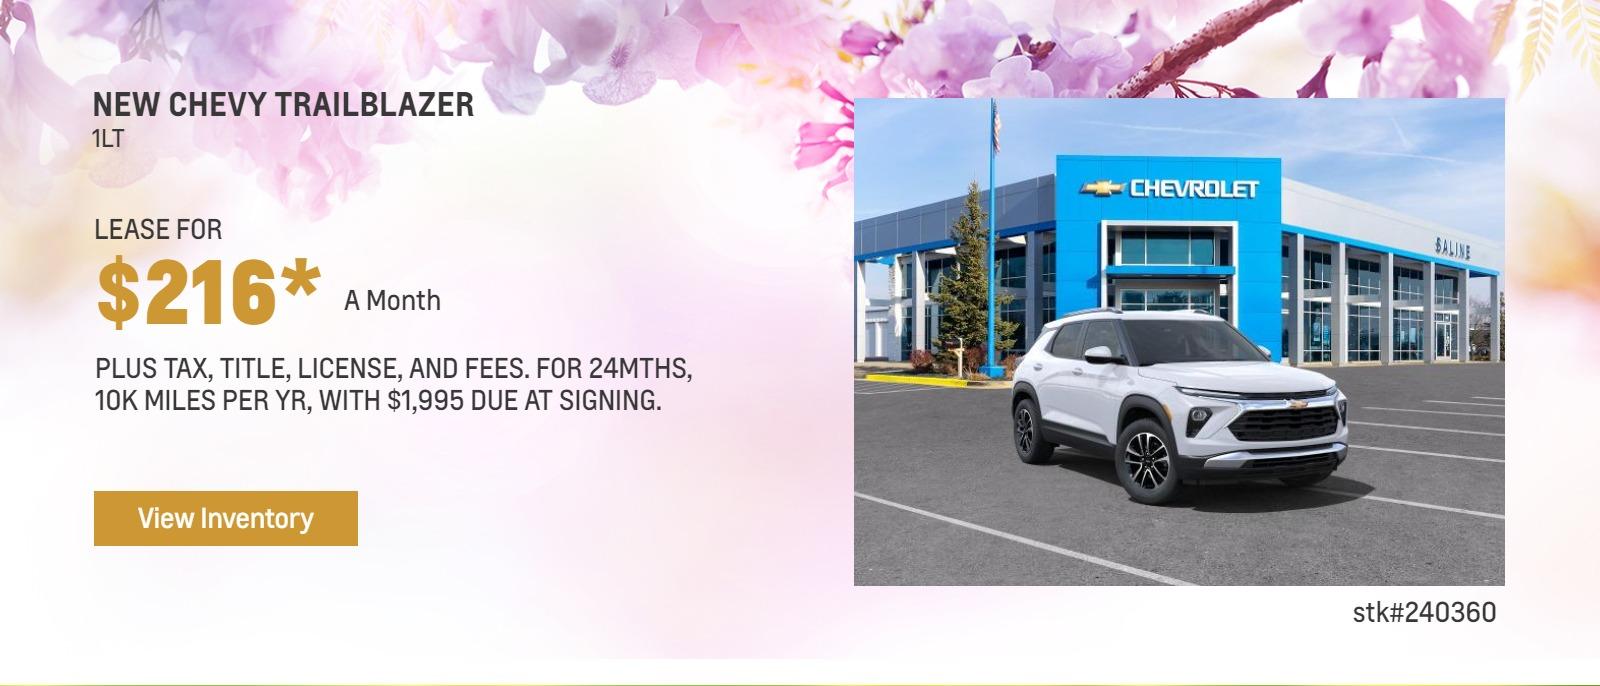 New Chevy Trailblazer LT:
Lease for 24 mths, 10K miles per yr. for $216* a mth plus tax, title, license, and fees, with $1995 due at signing. stlk#240360